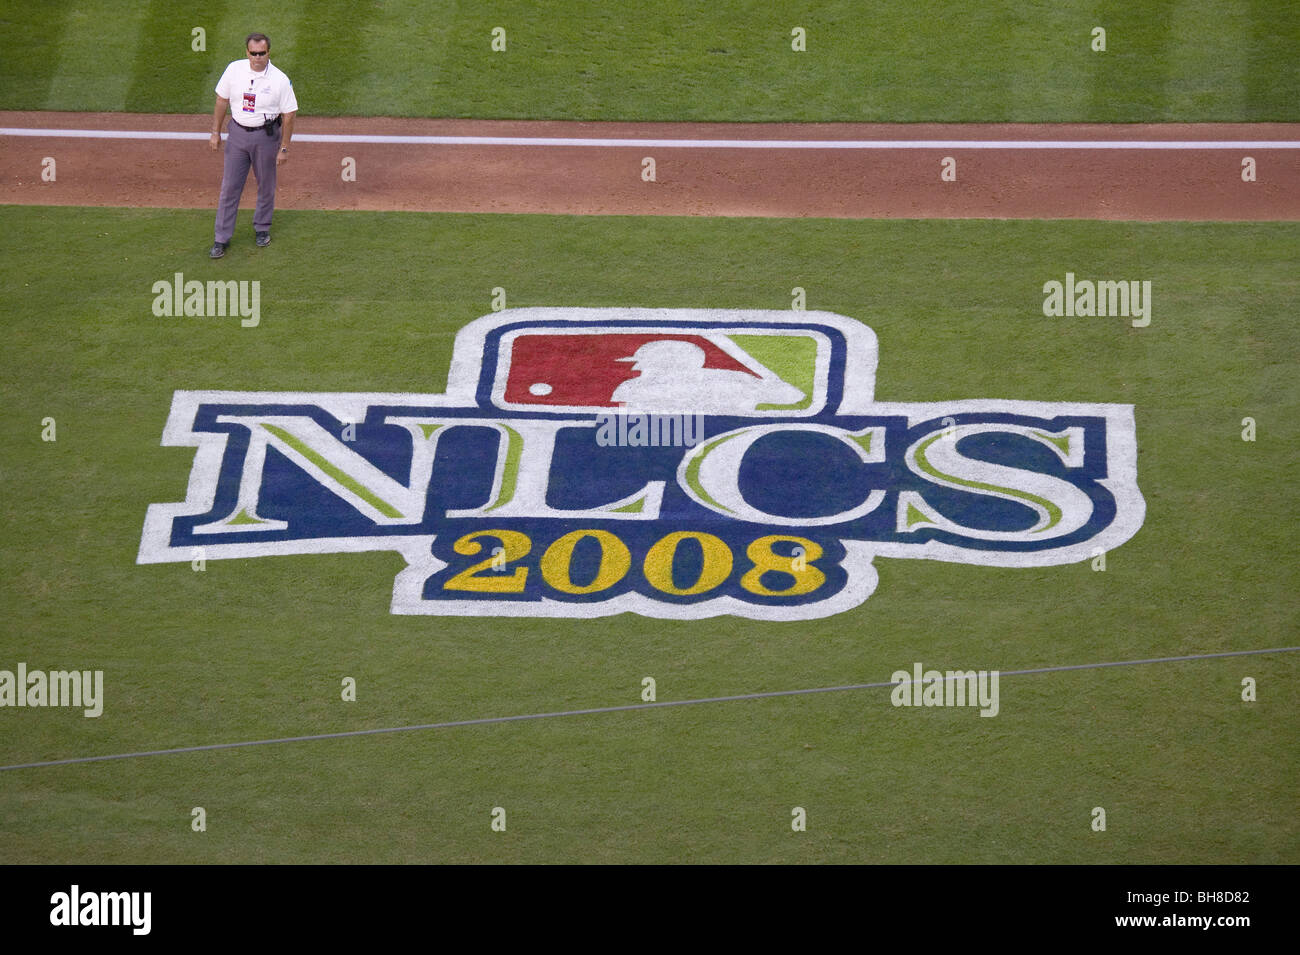 Field logo for National League Championship Series (NLCS), Dodger Stadium, Los Angeles, CA on October 12, 2008 Stock Photo